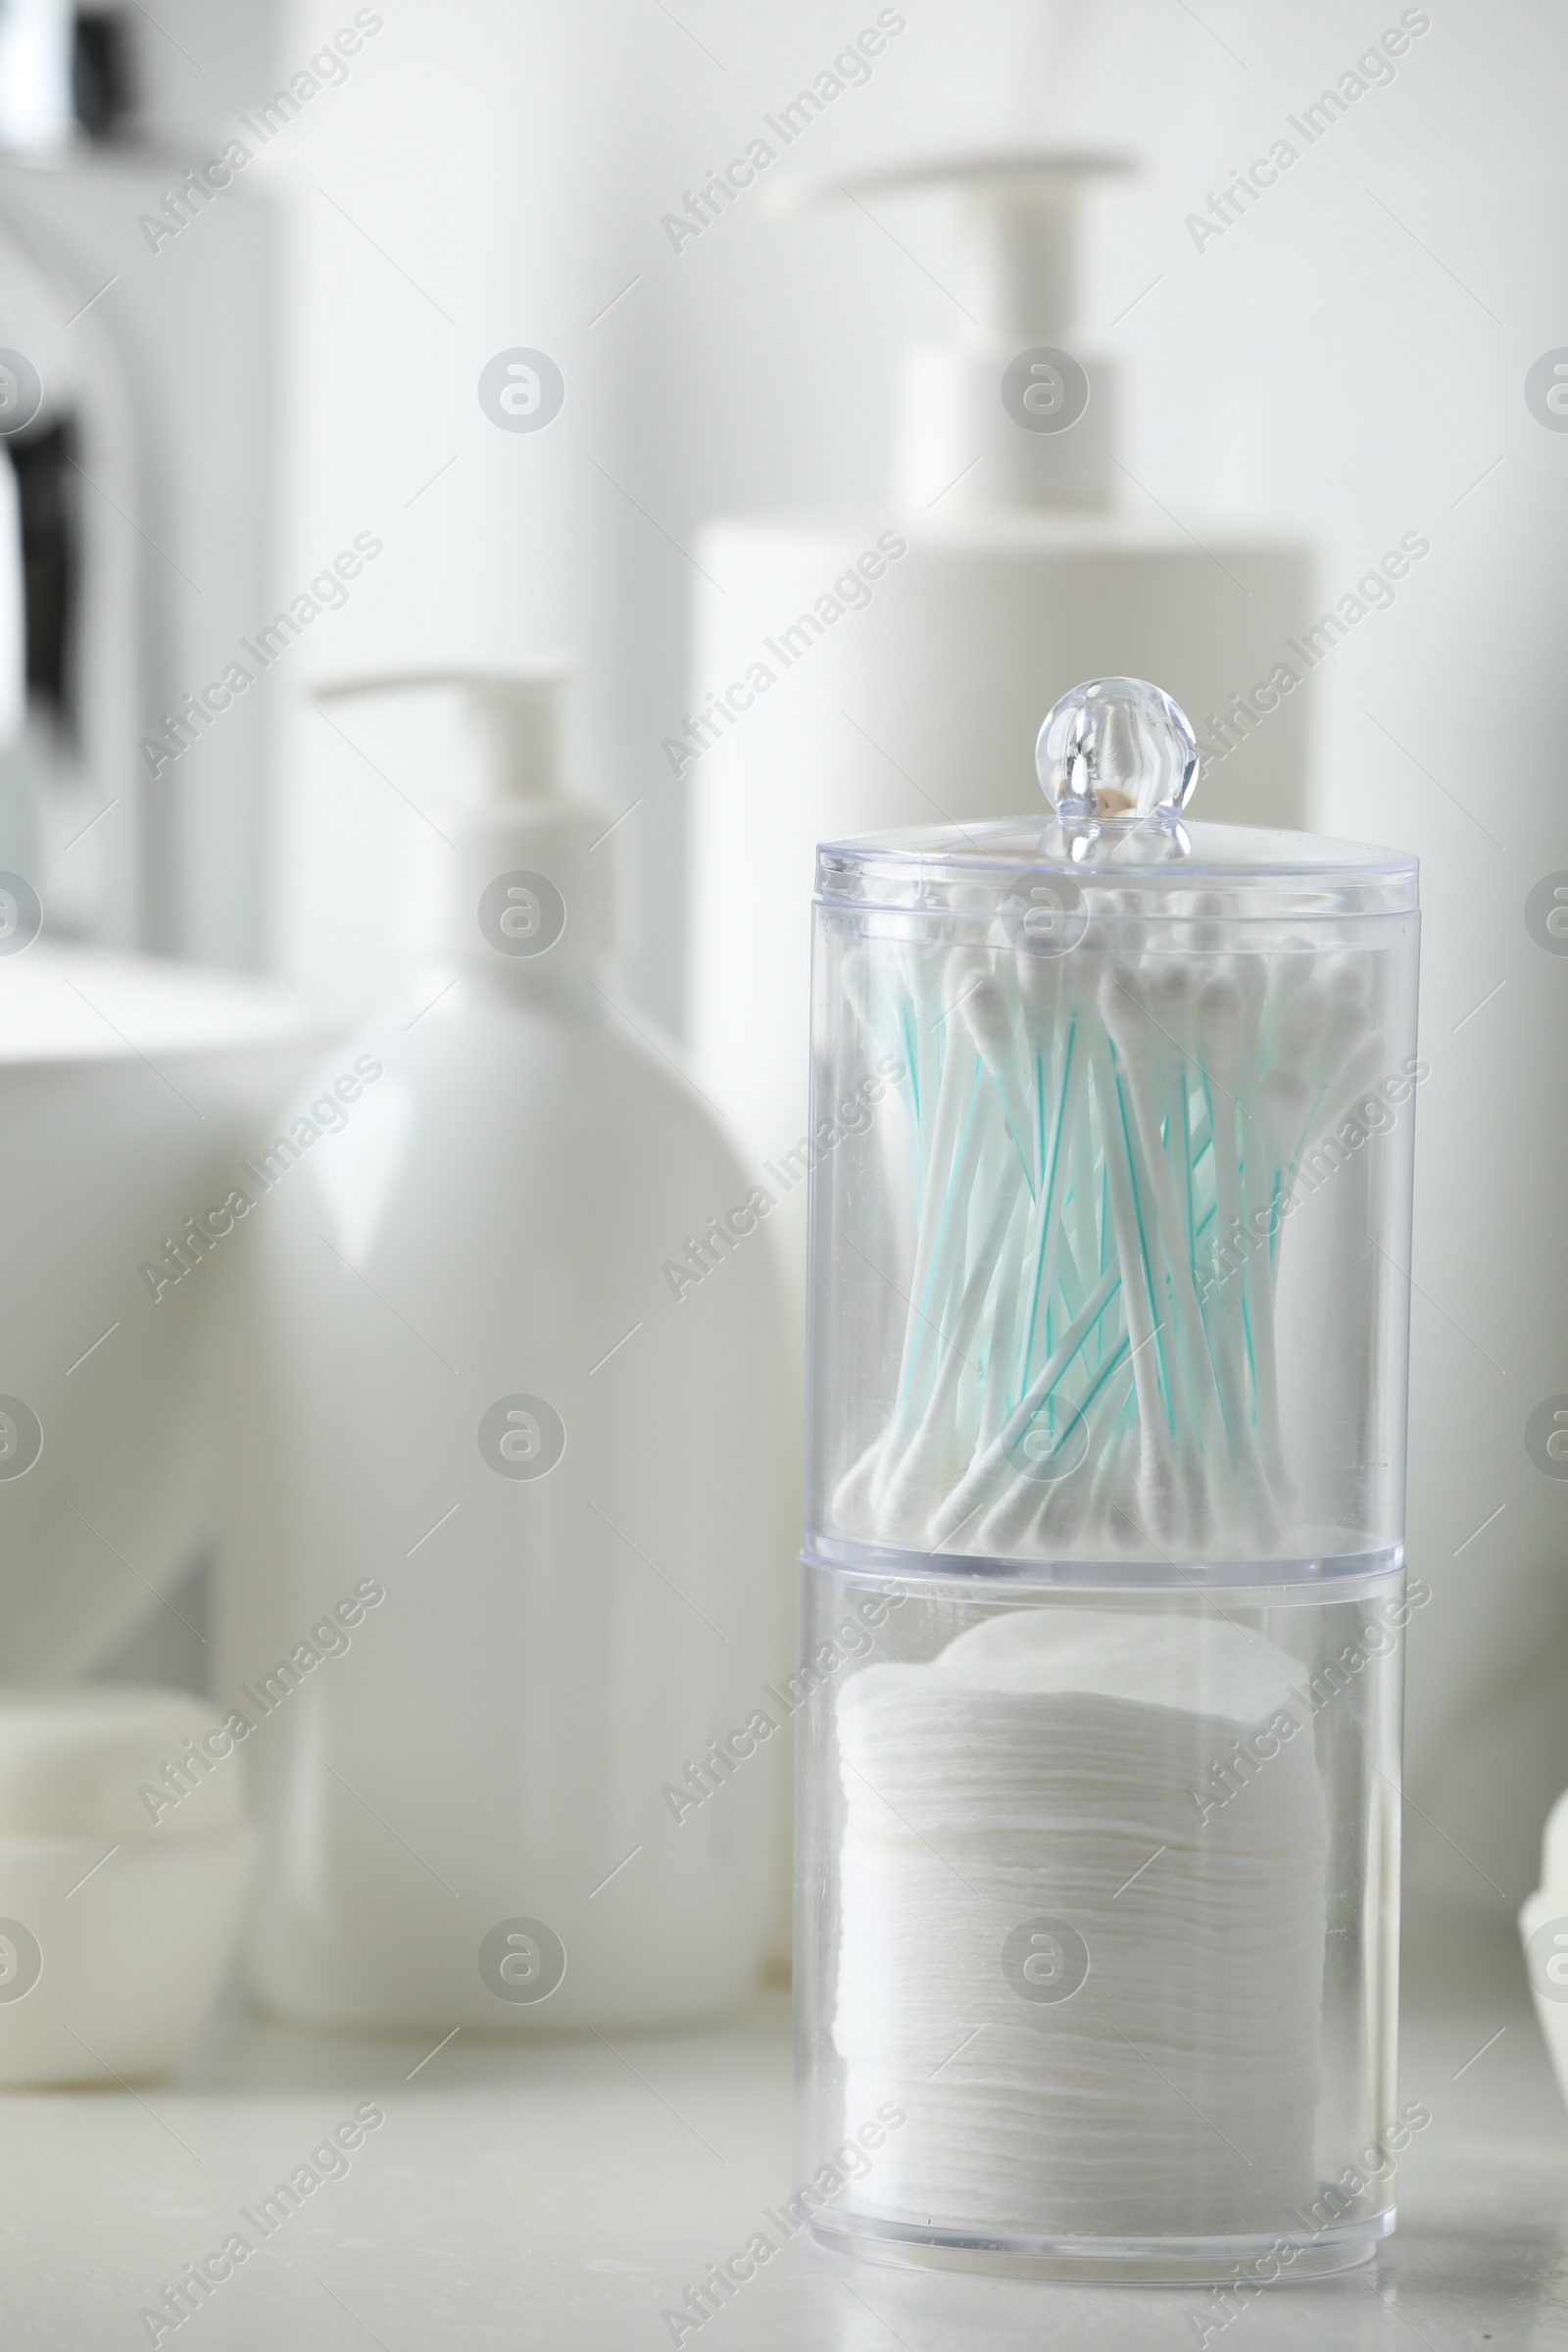 Photo of Containers with cotton swabs and pads near cosmetic products on white countertop in bathroom